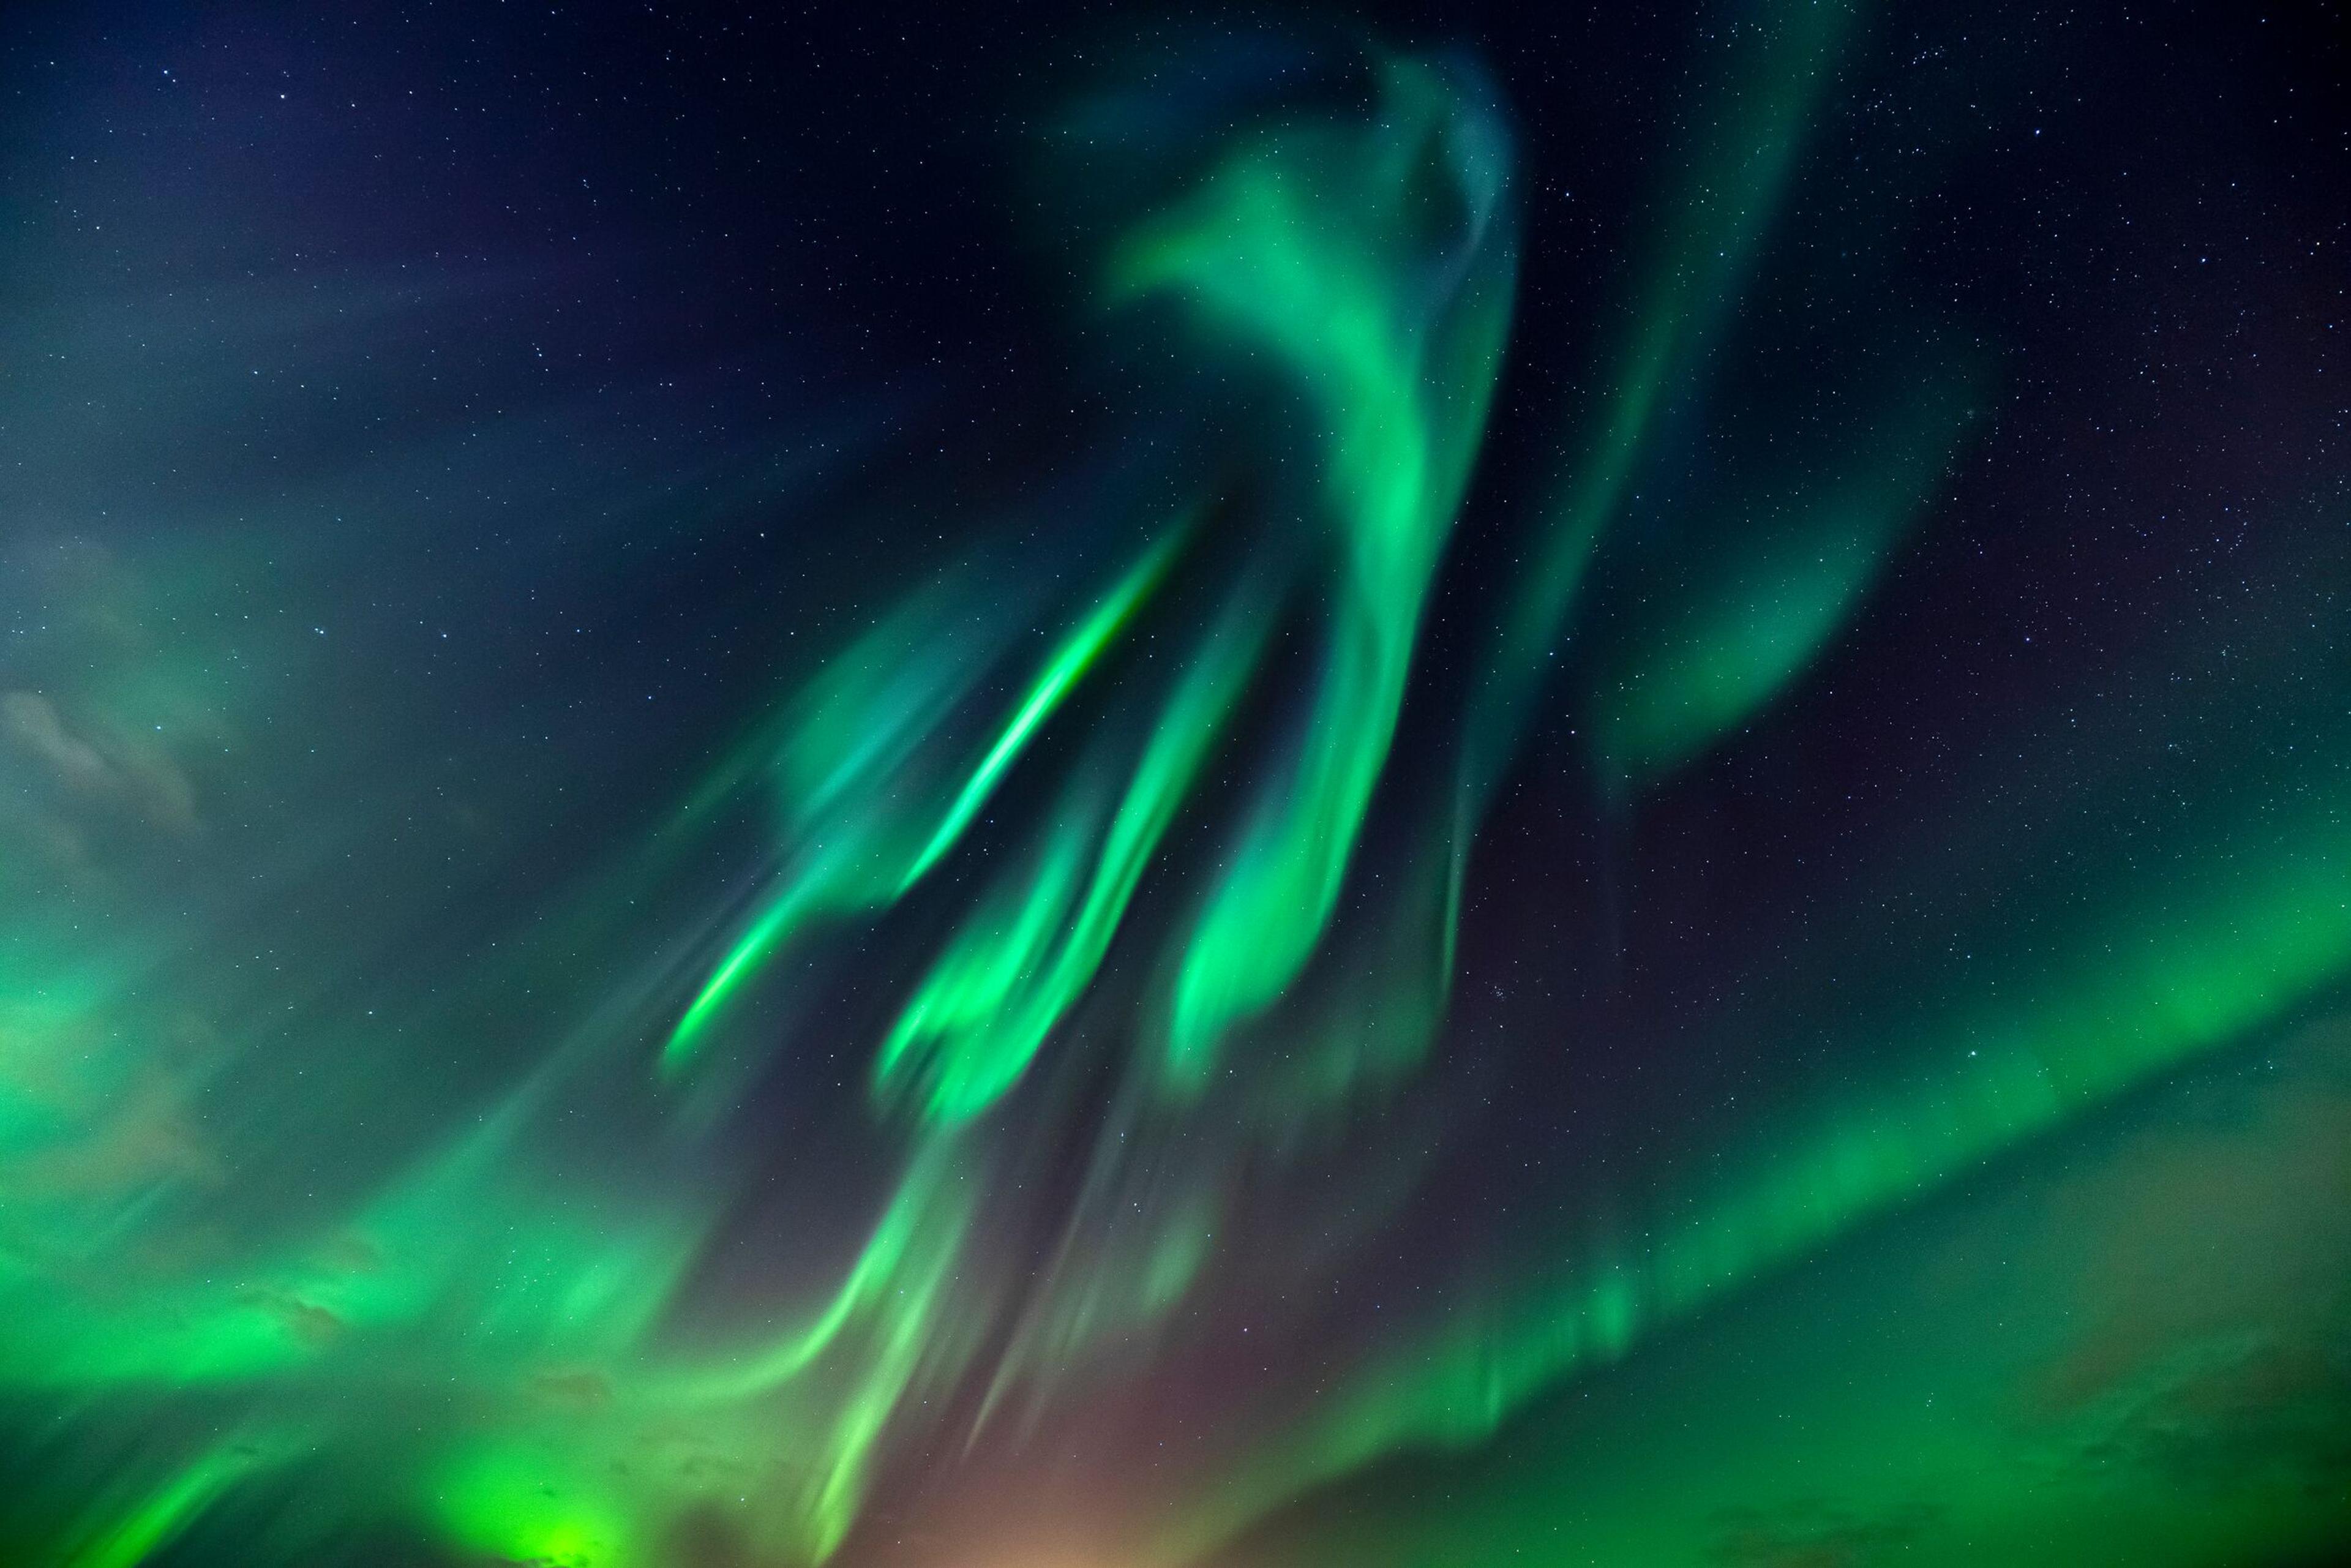 Dynamic and vivid Northern Lights in the night sky, with wave-like patterns.